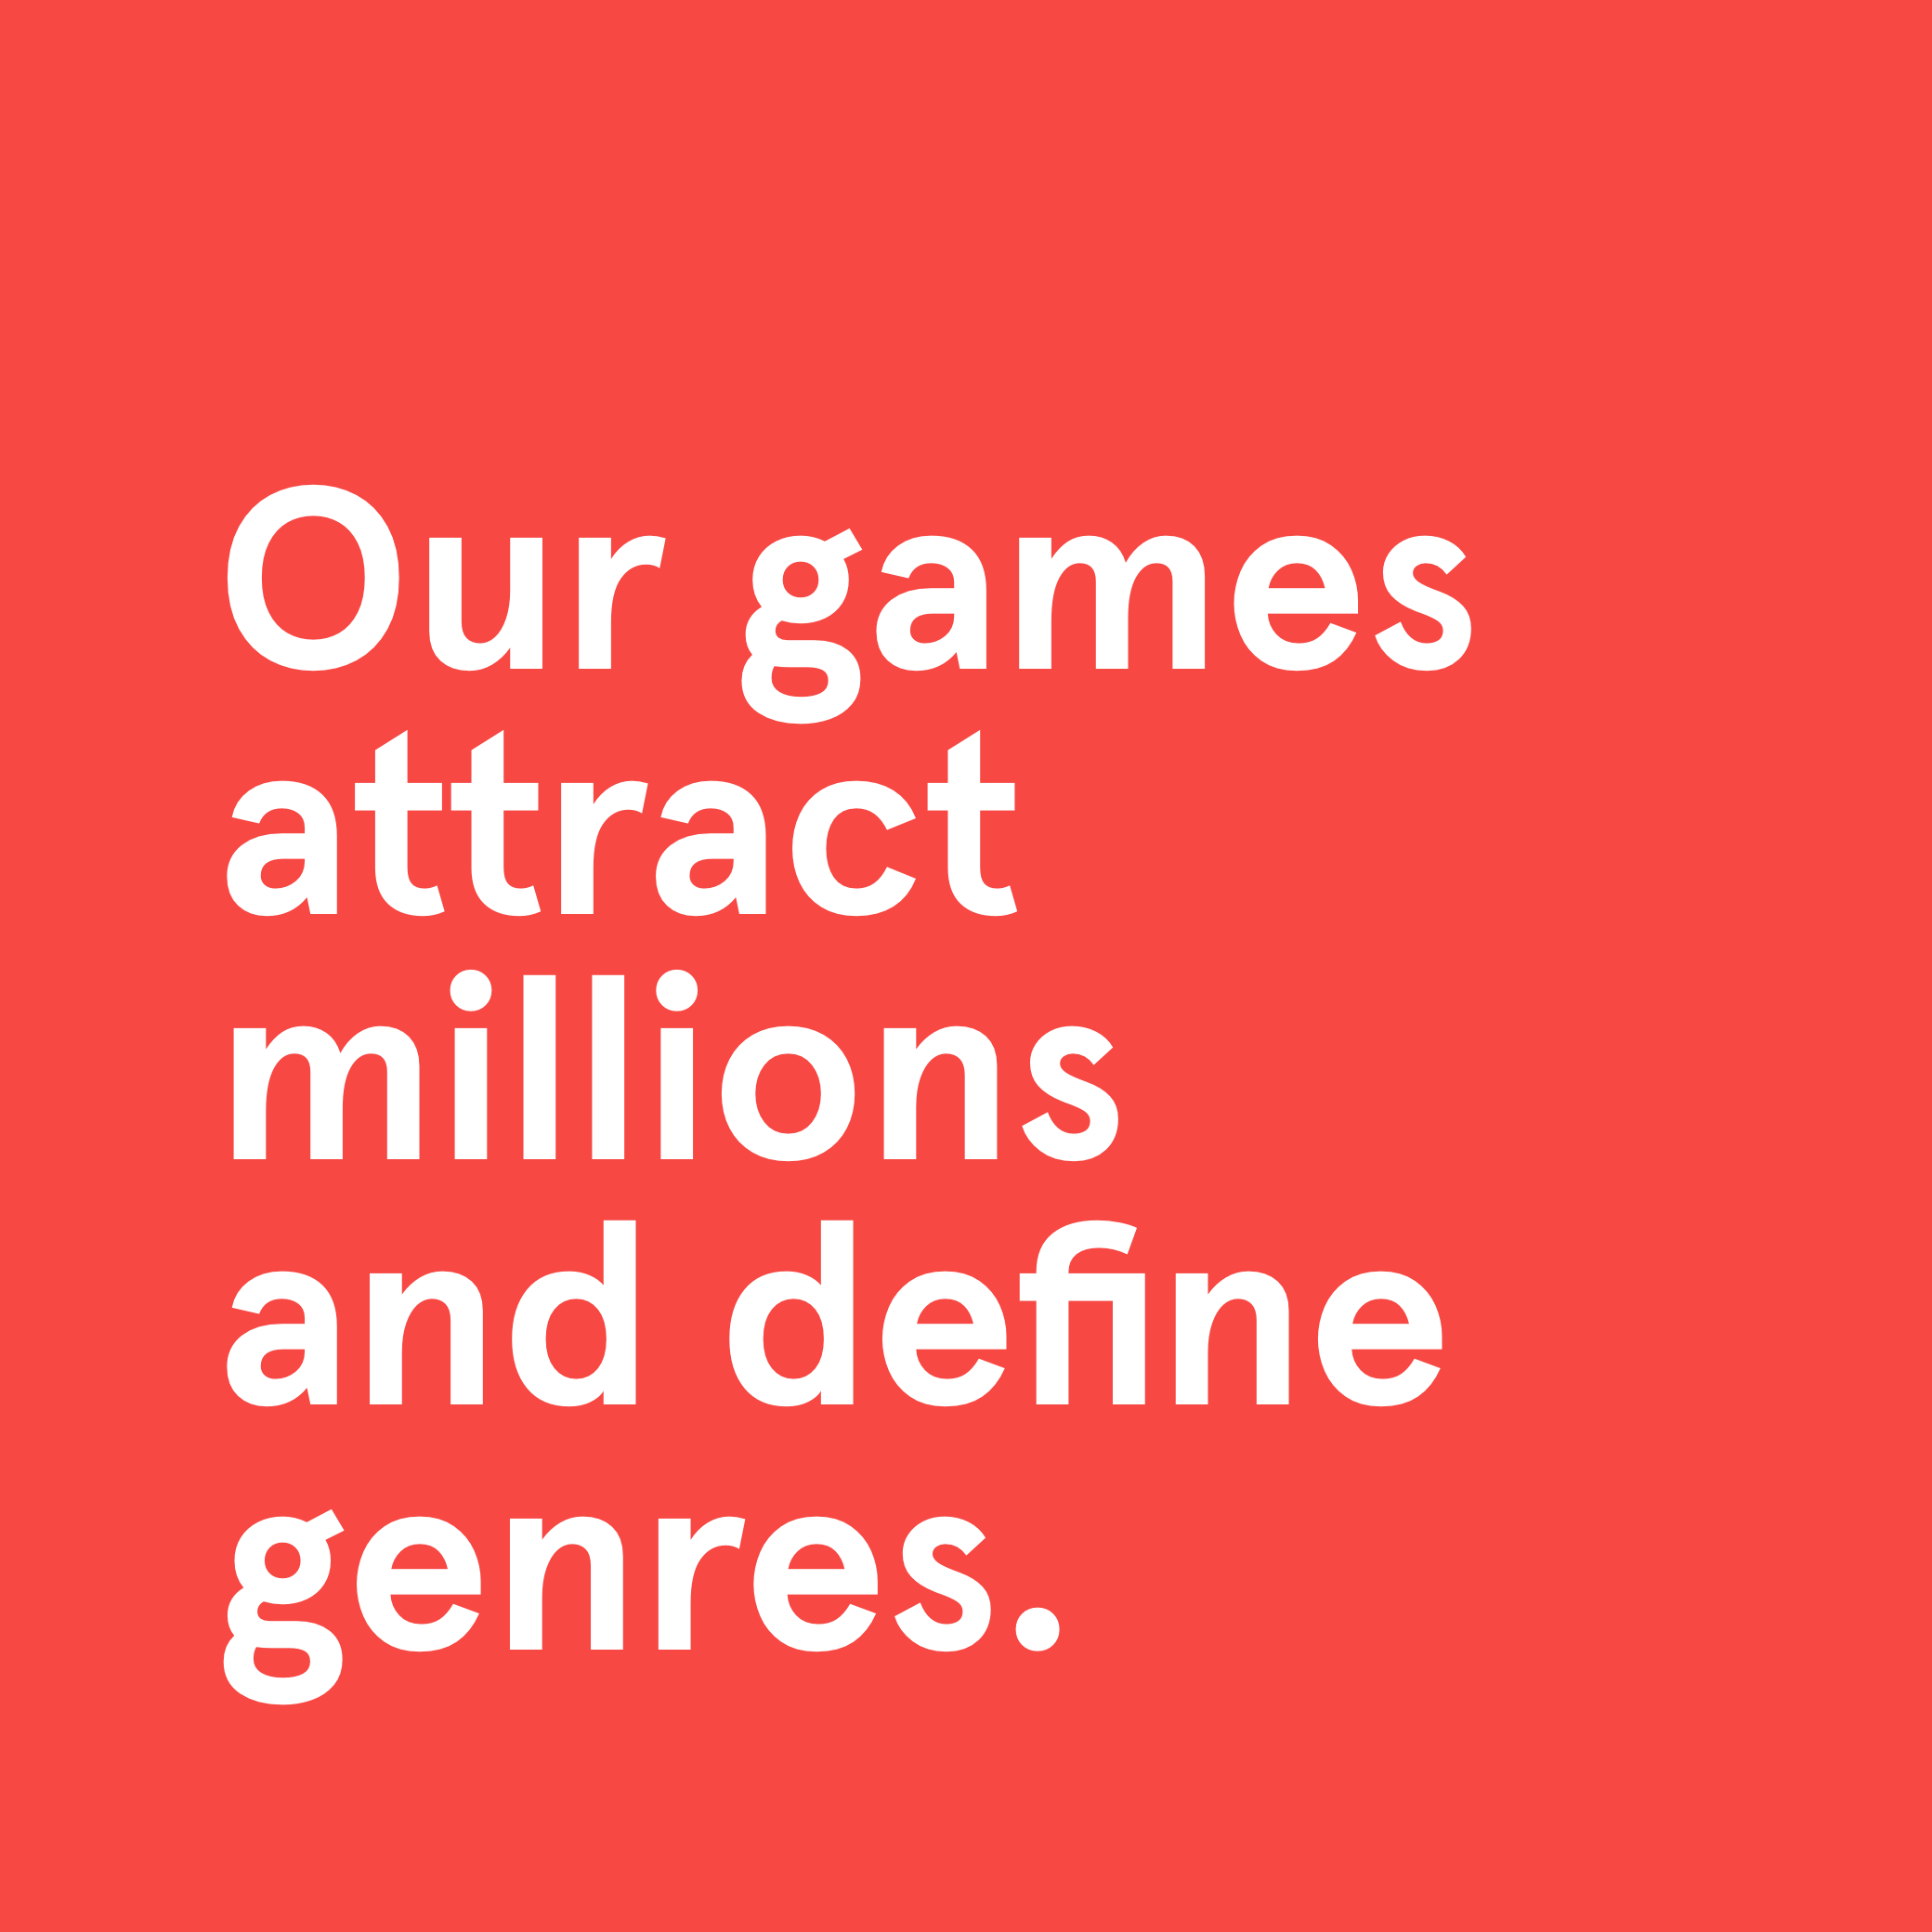 Our games attract millions and define genres.